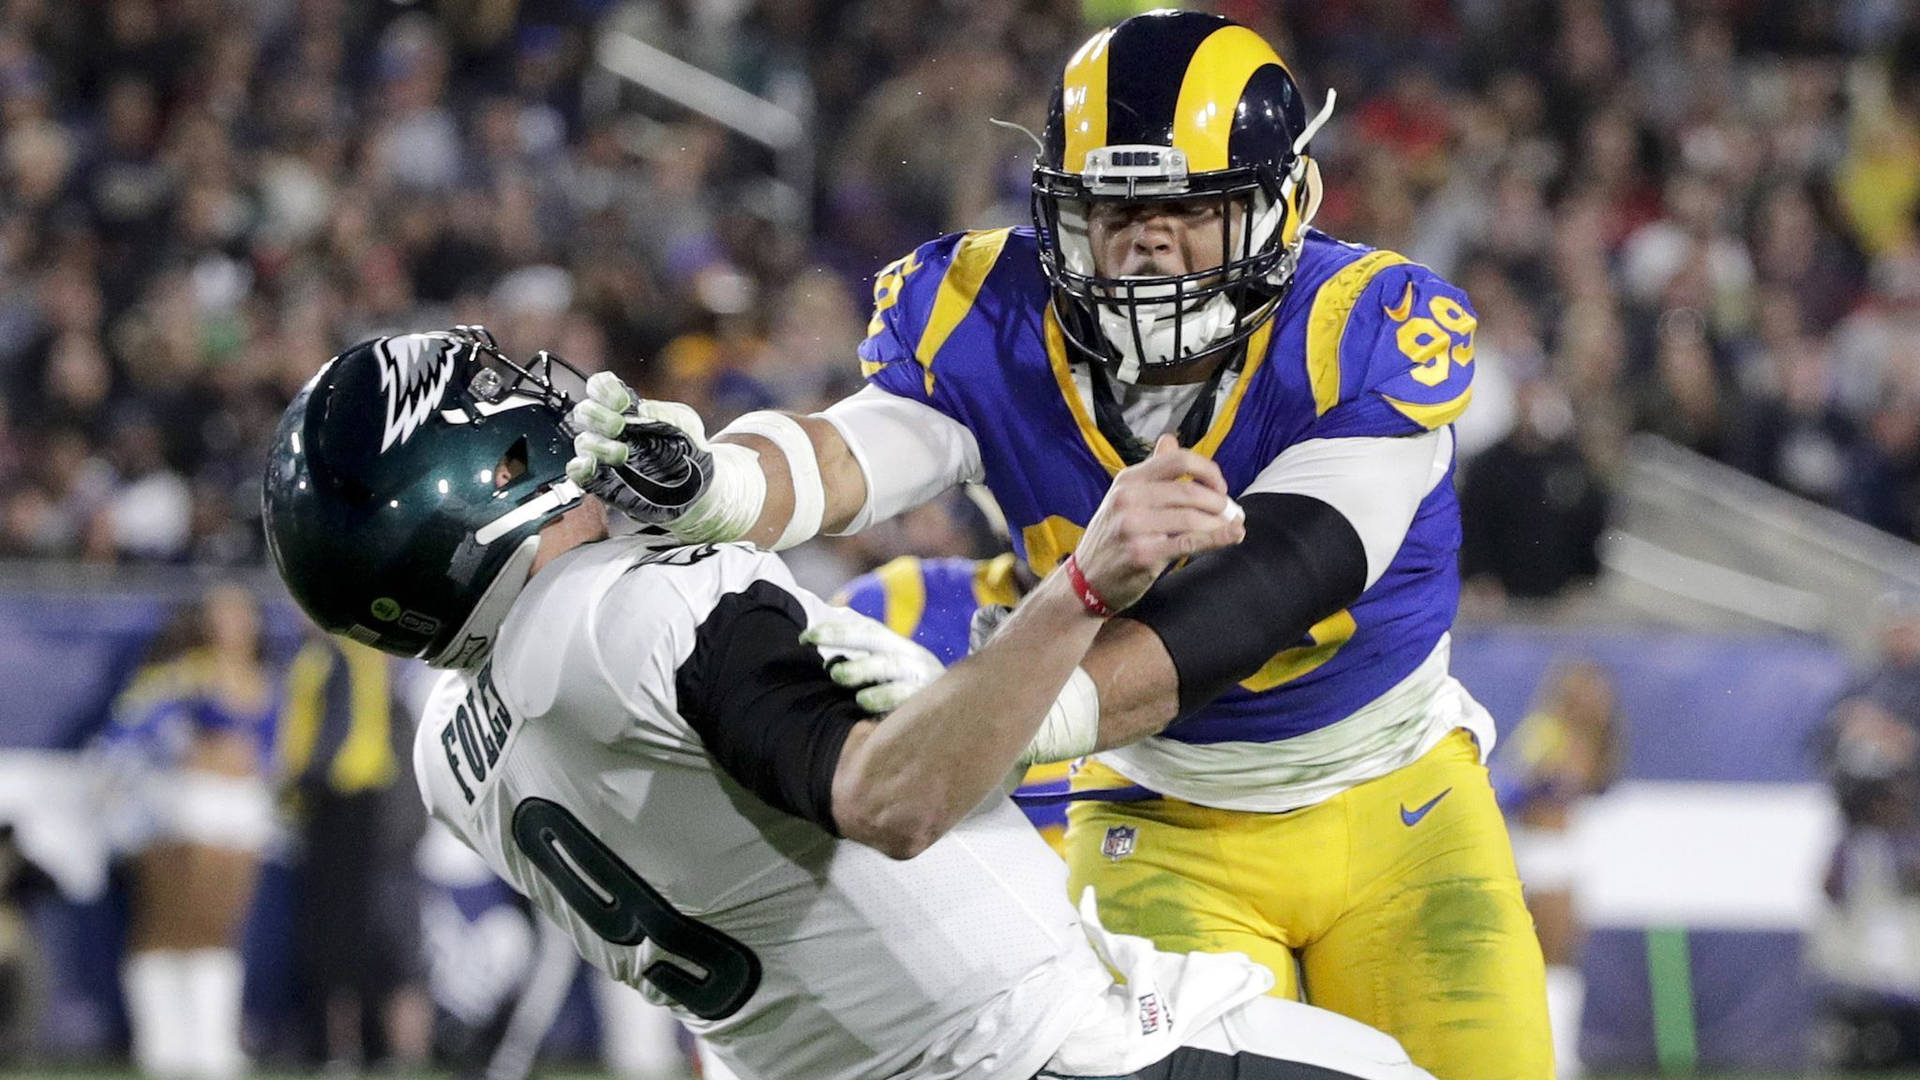 Nfl Match Aaron Donald And Nick Foles Background